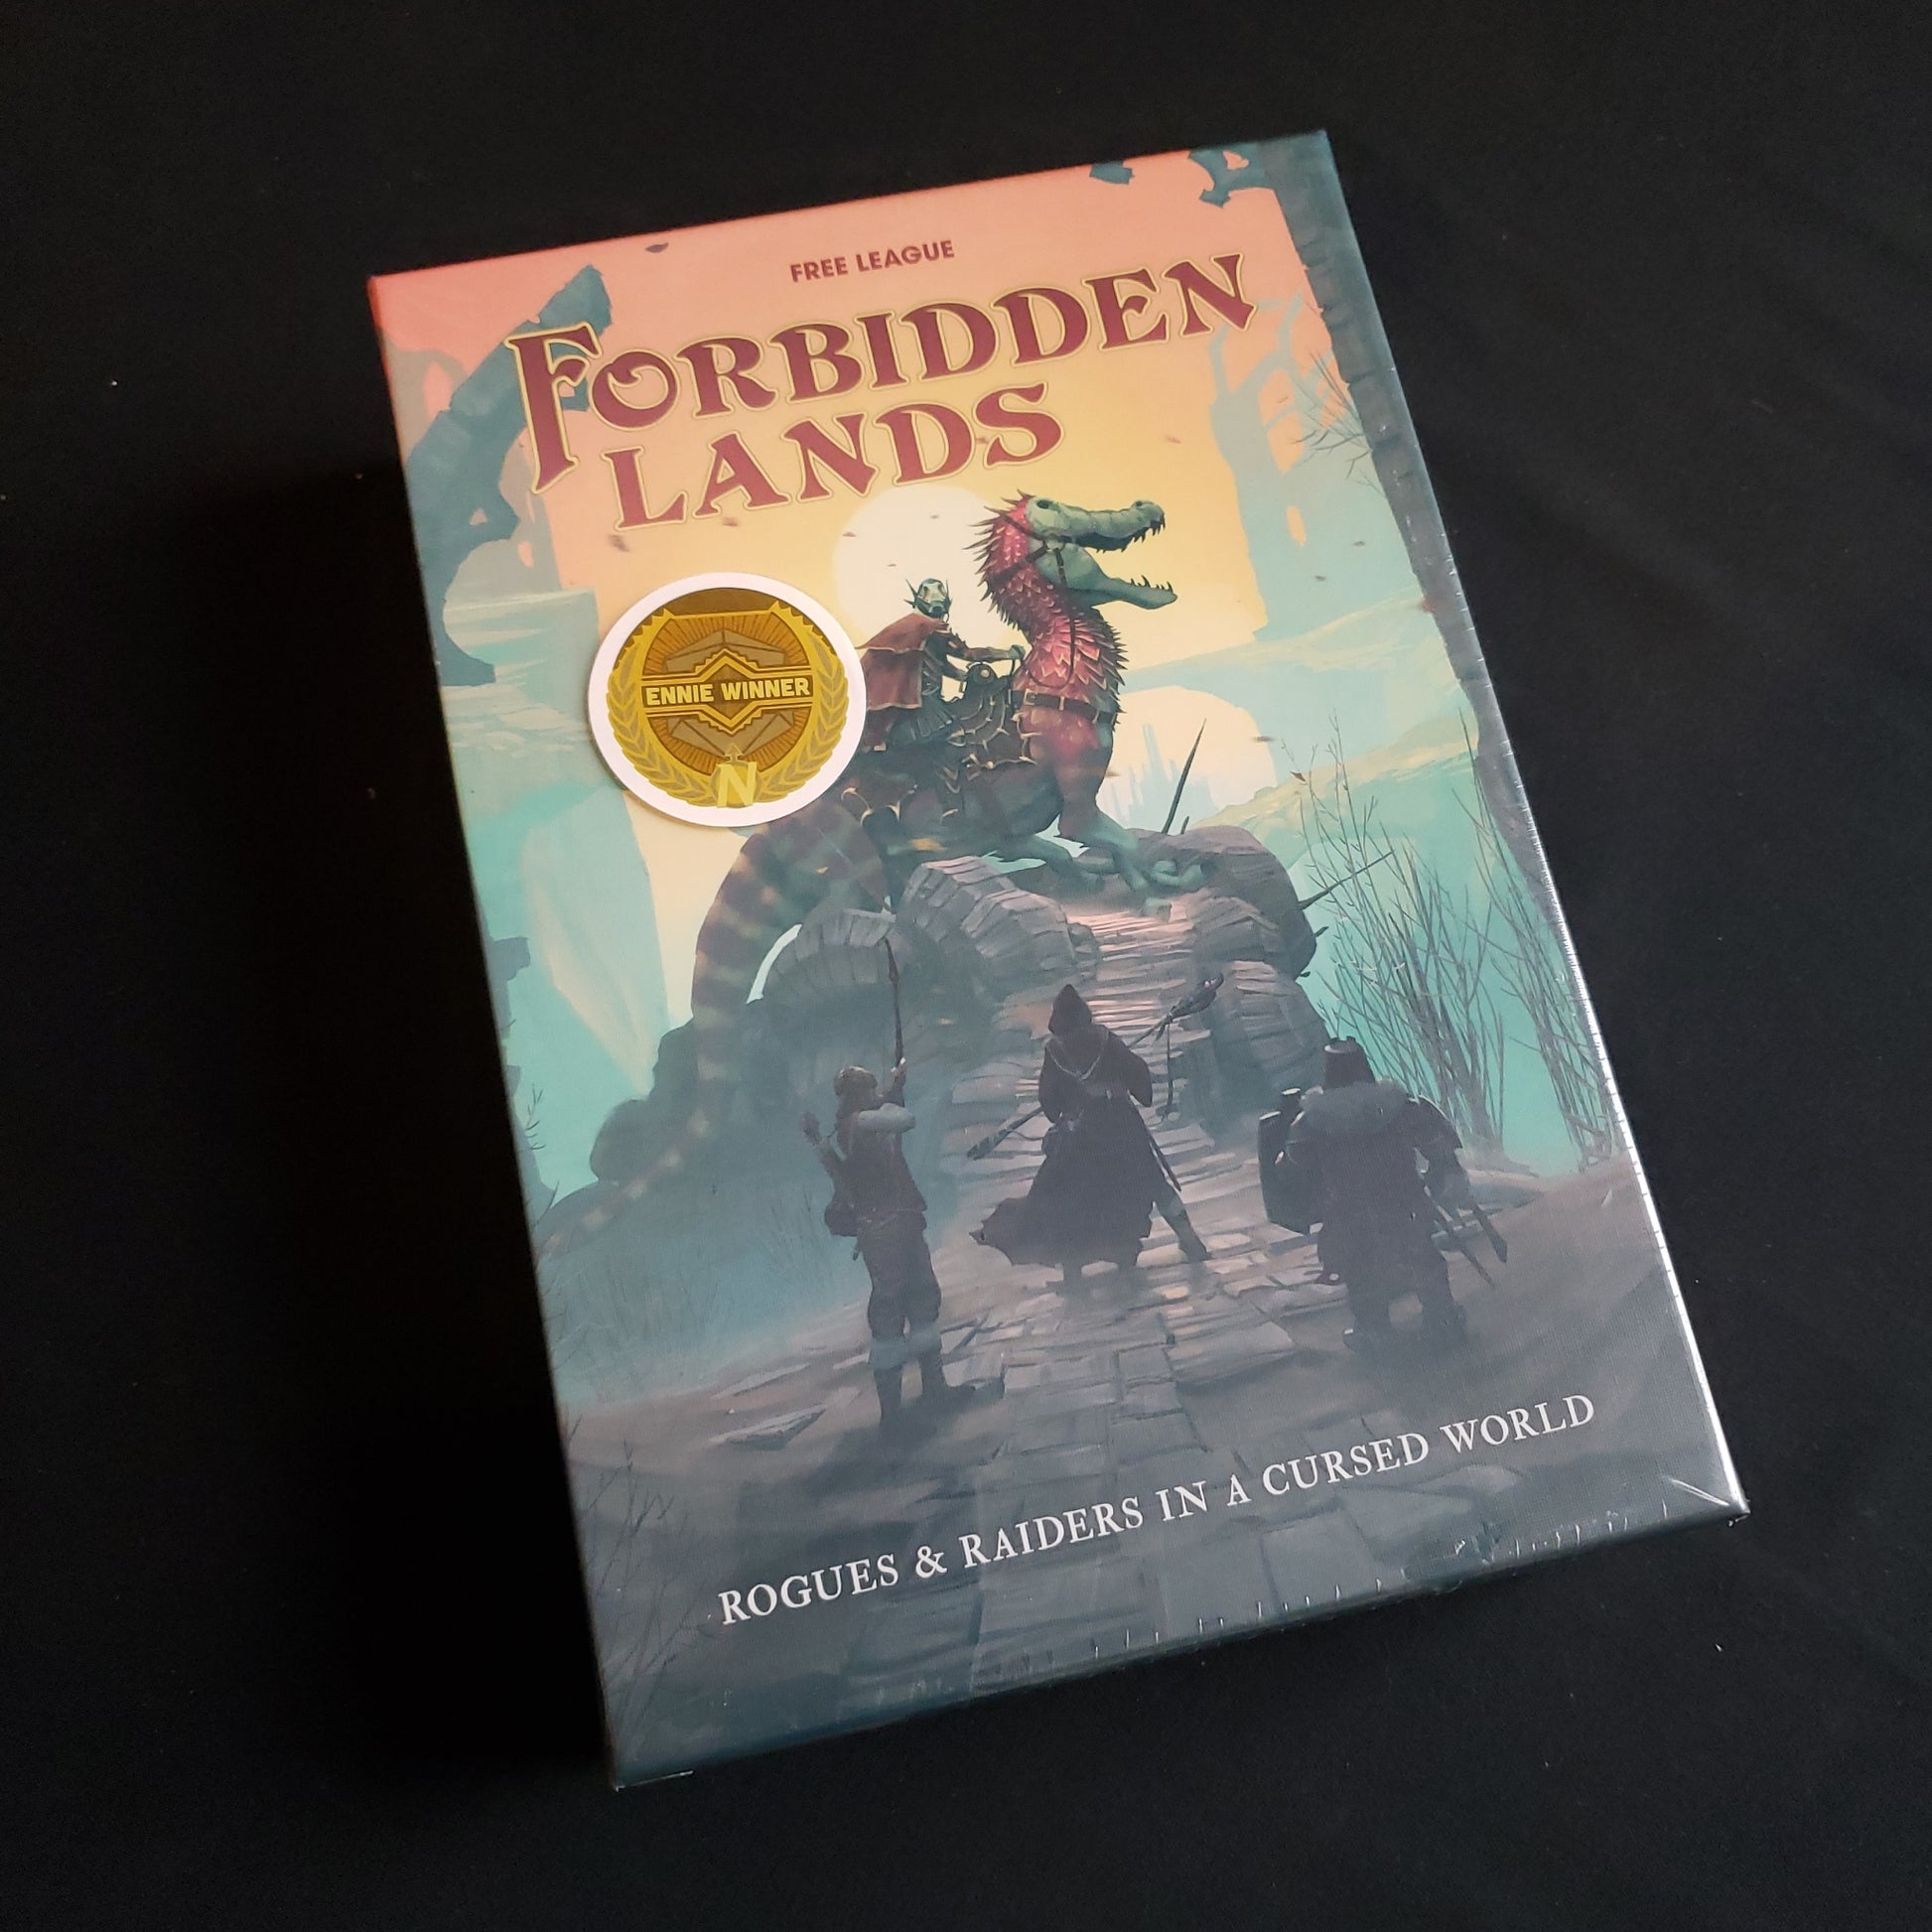 Image shows the front cover of the Core Set box for the Forbidden Lands roleplaying game